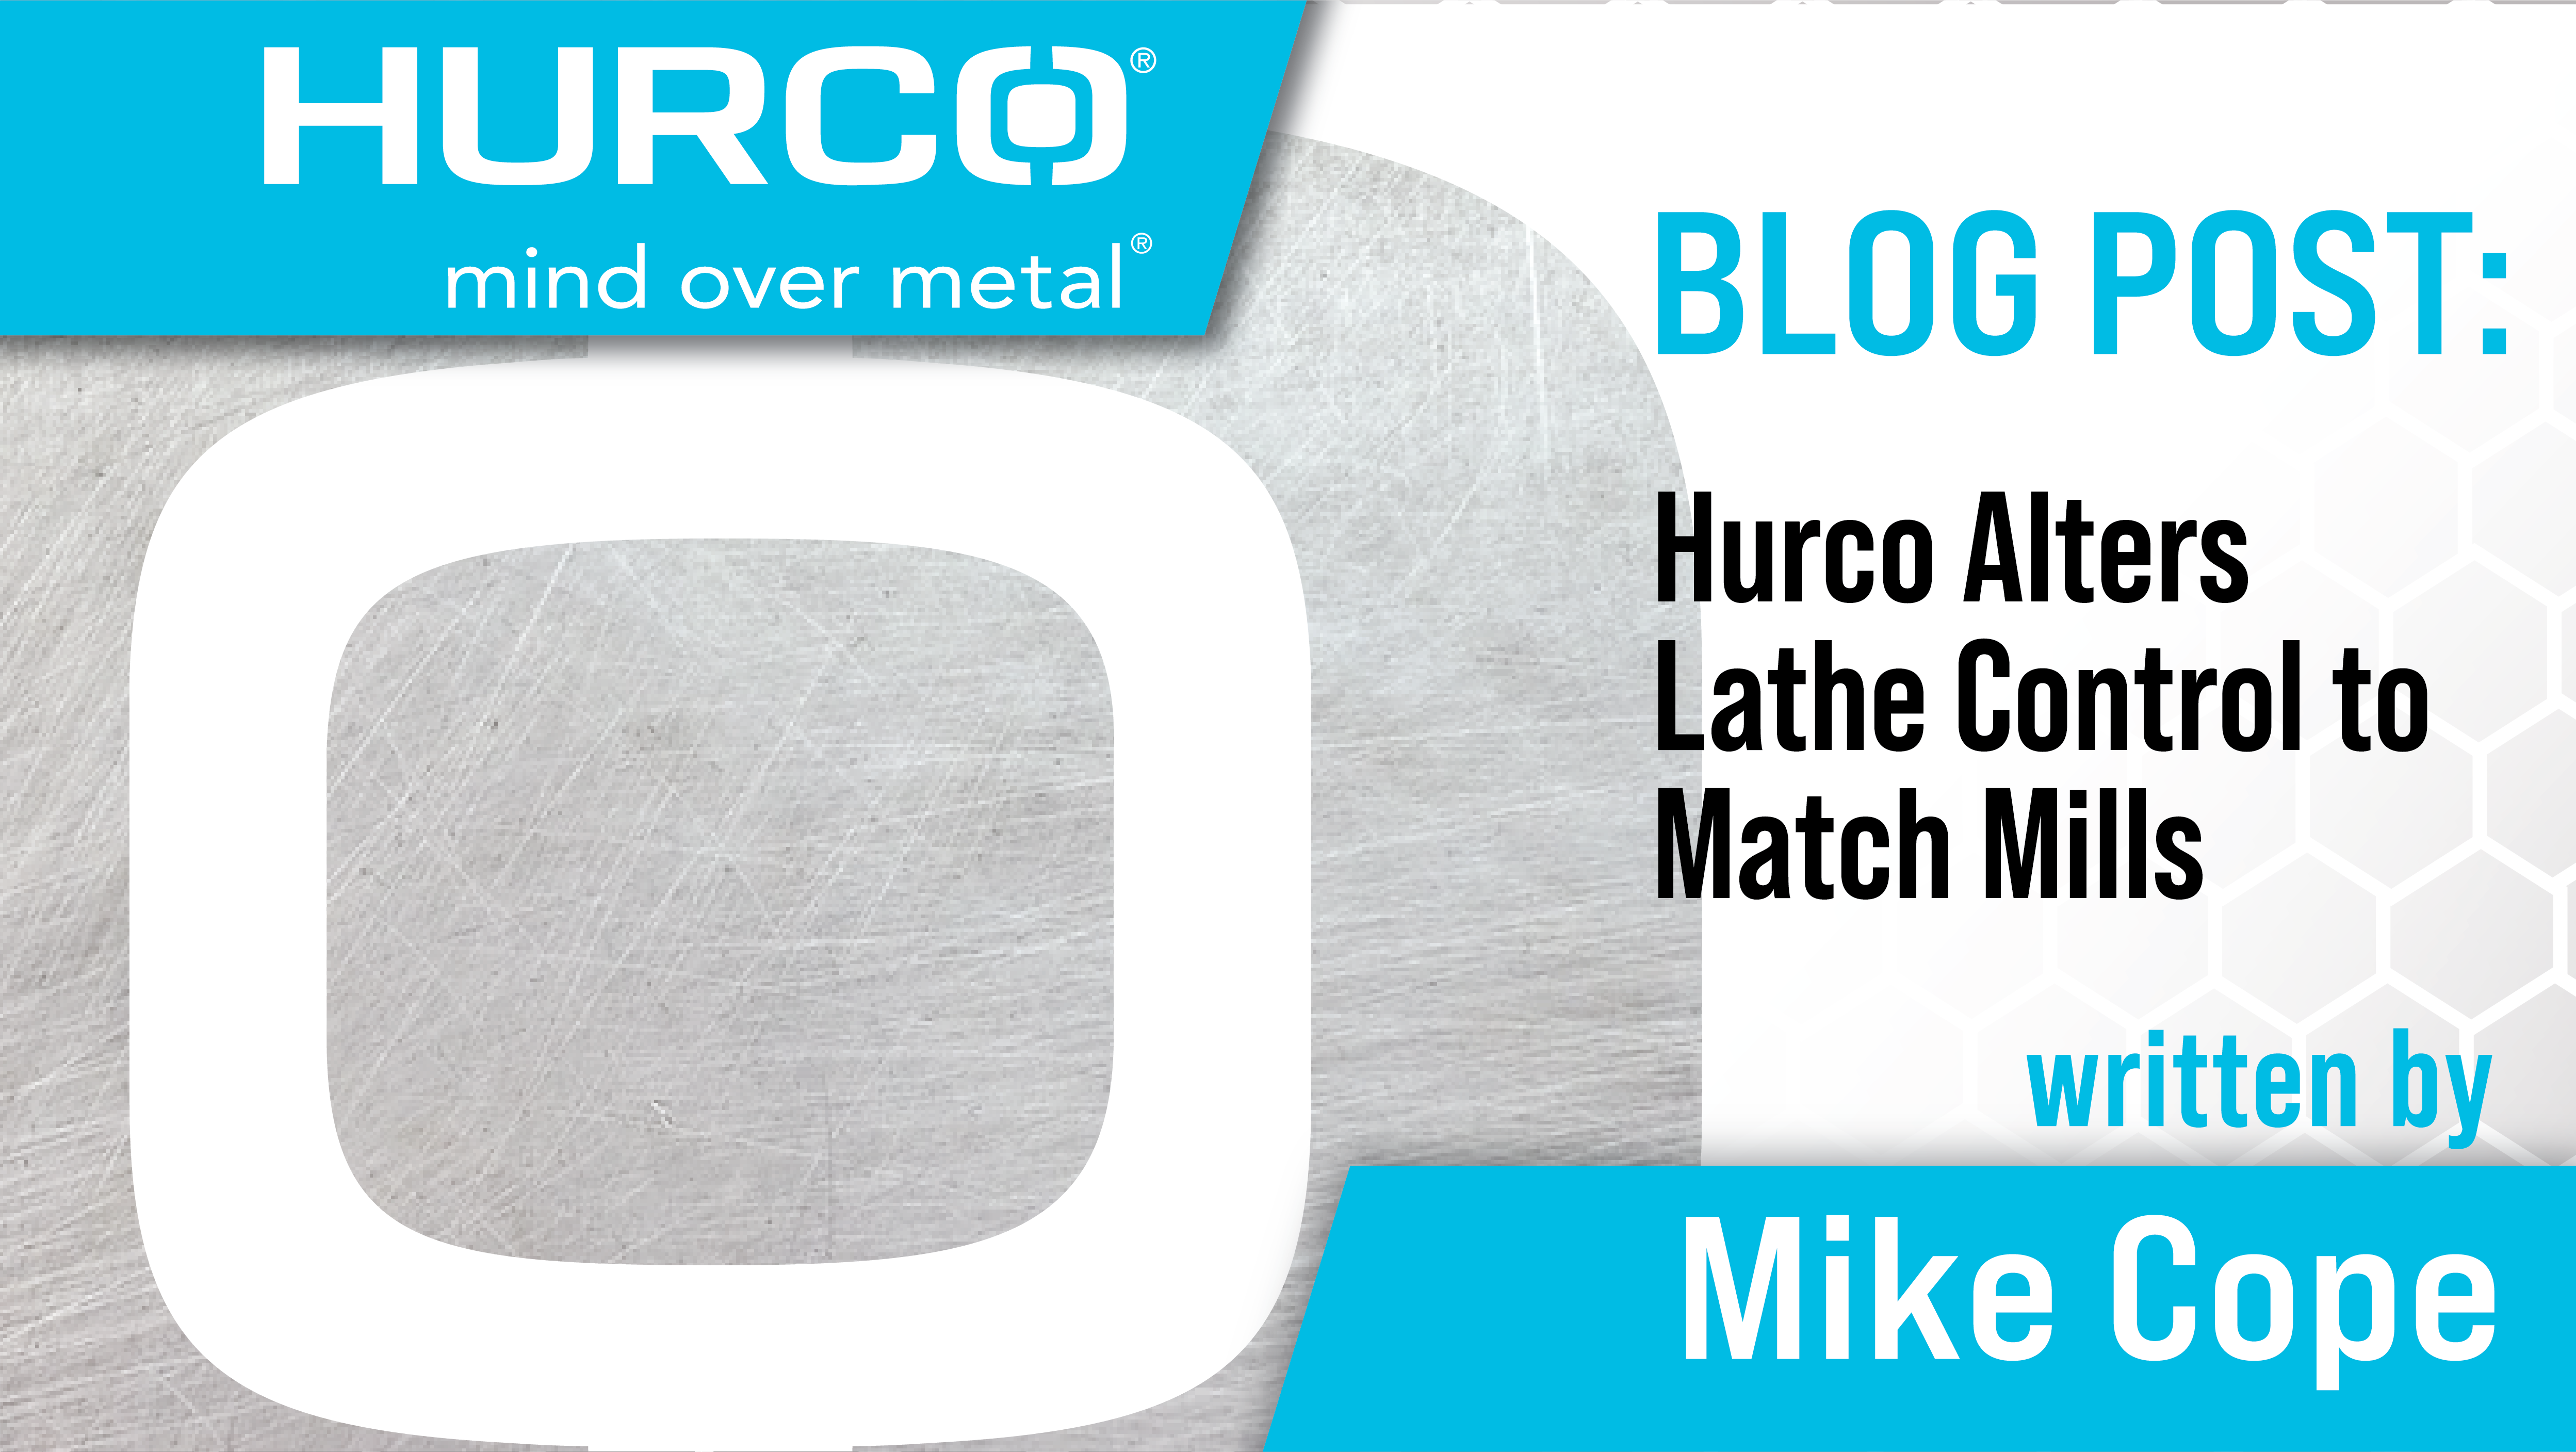 Hurco Alters Lathe Control to Match Mills